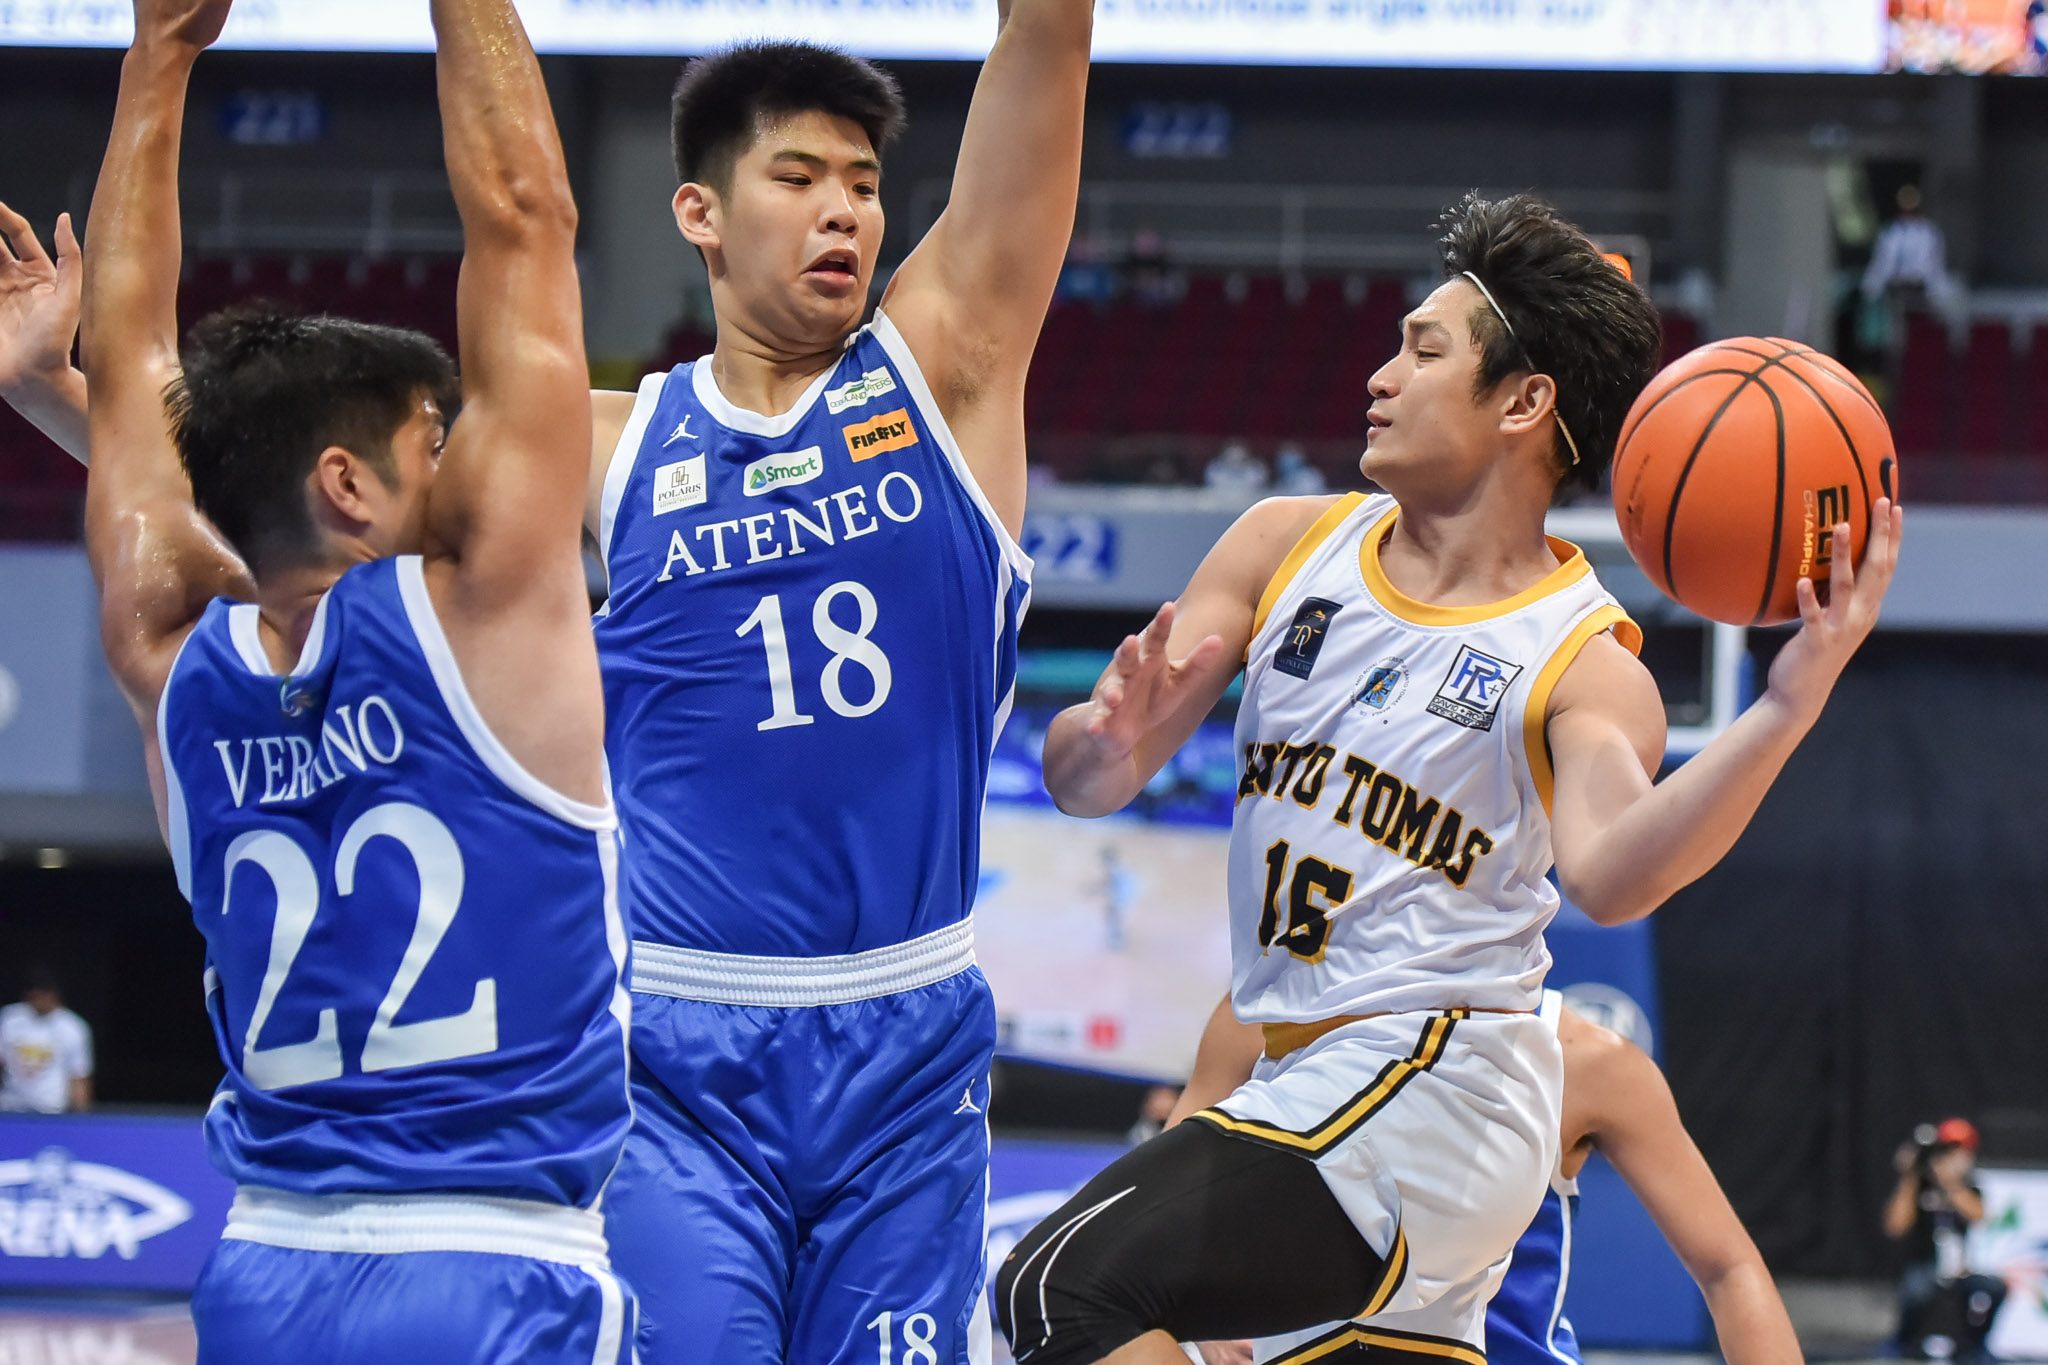 Ateneo shreds UST by 50 points, stays perfect at 10-0